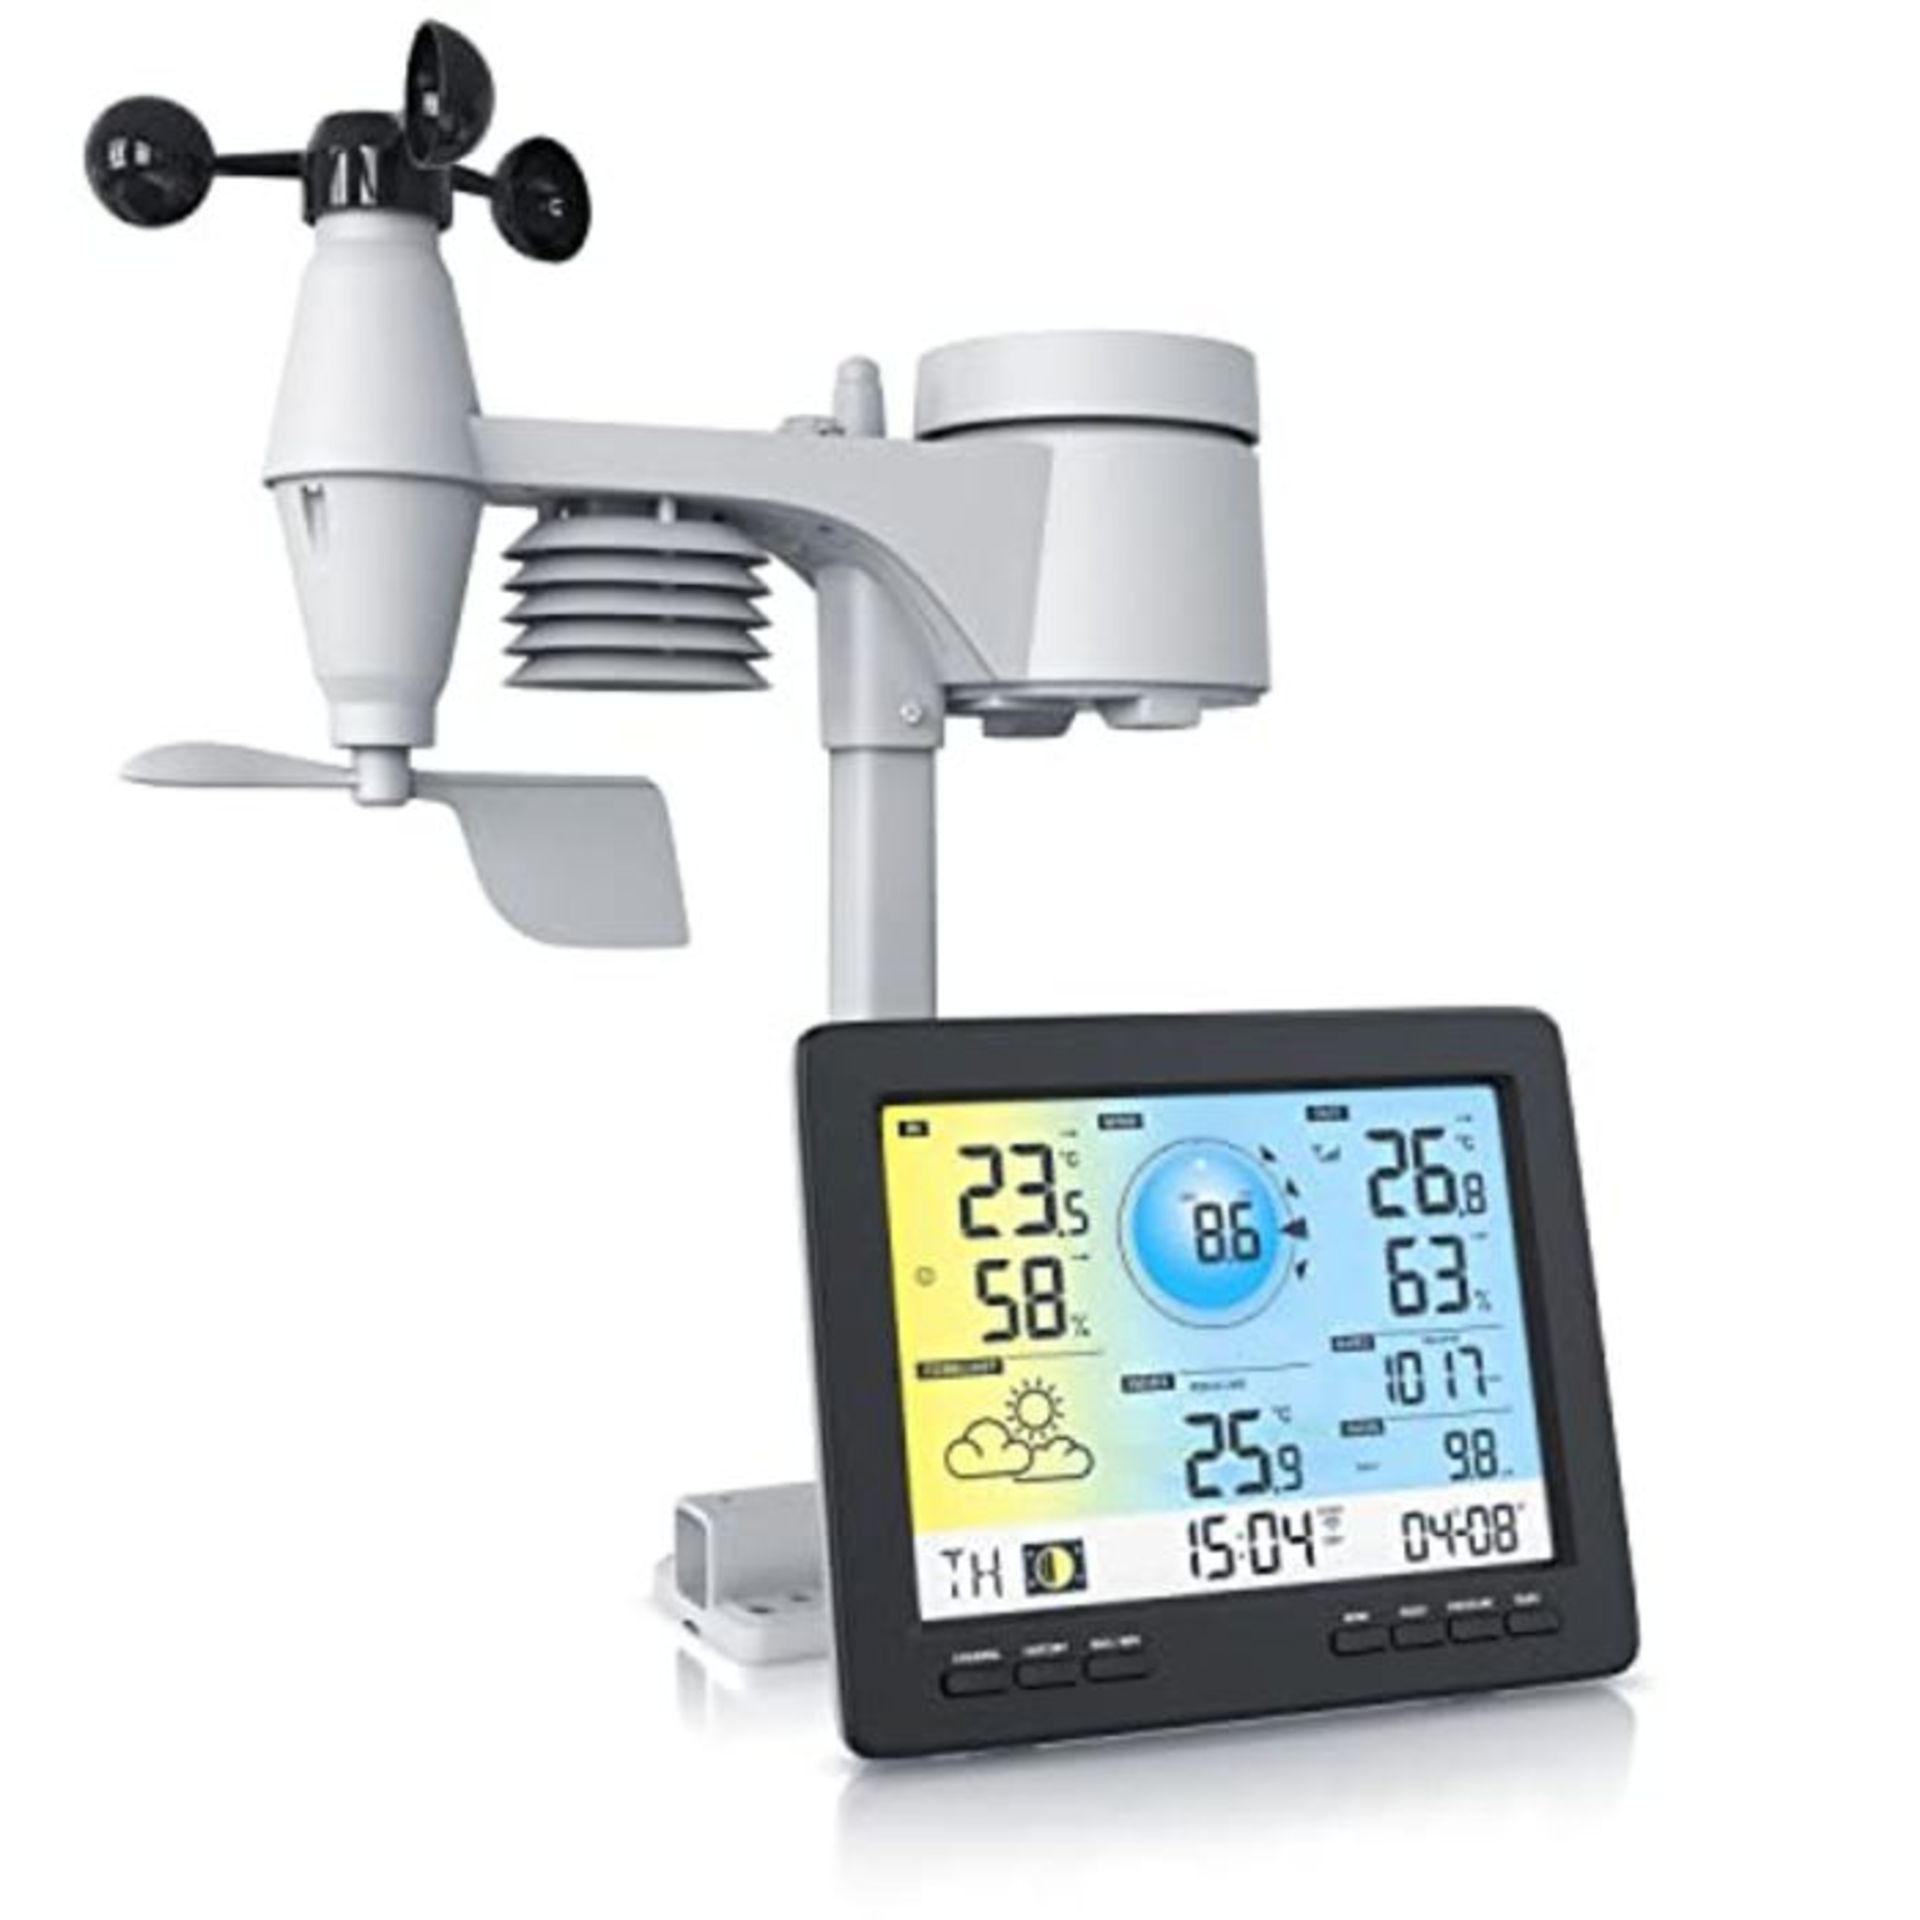 RRP £120.00 Brandson WLAN Weather Station Wireless with 5 in 1 Outdoor Sensor Black